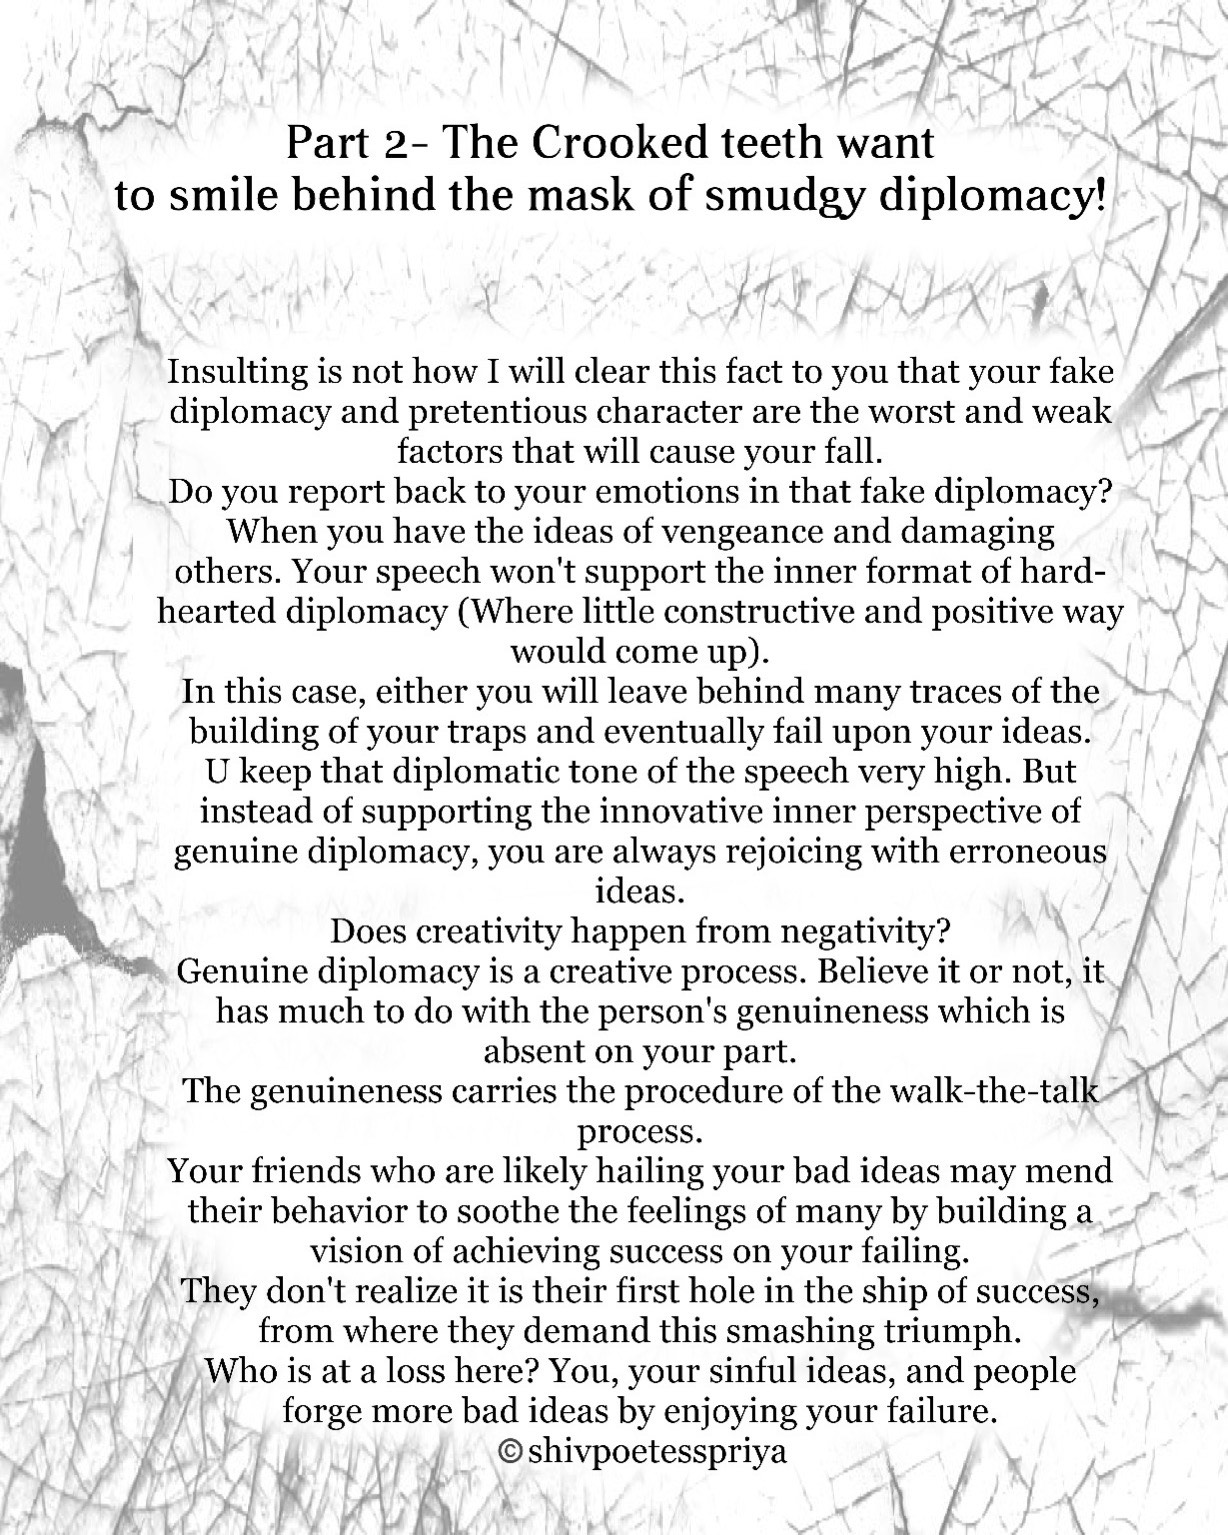 The Crooked Teeth Want To Smile Behind The Mask Of Smudgy Diplomacy!